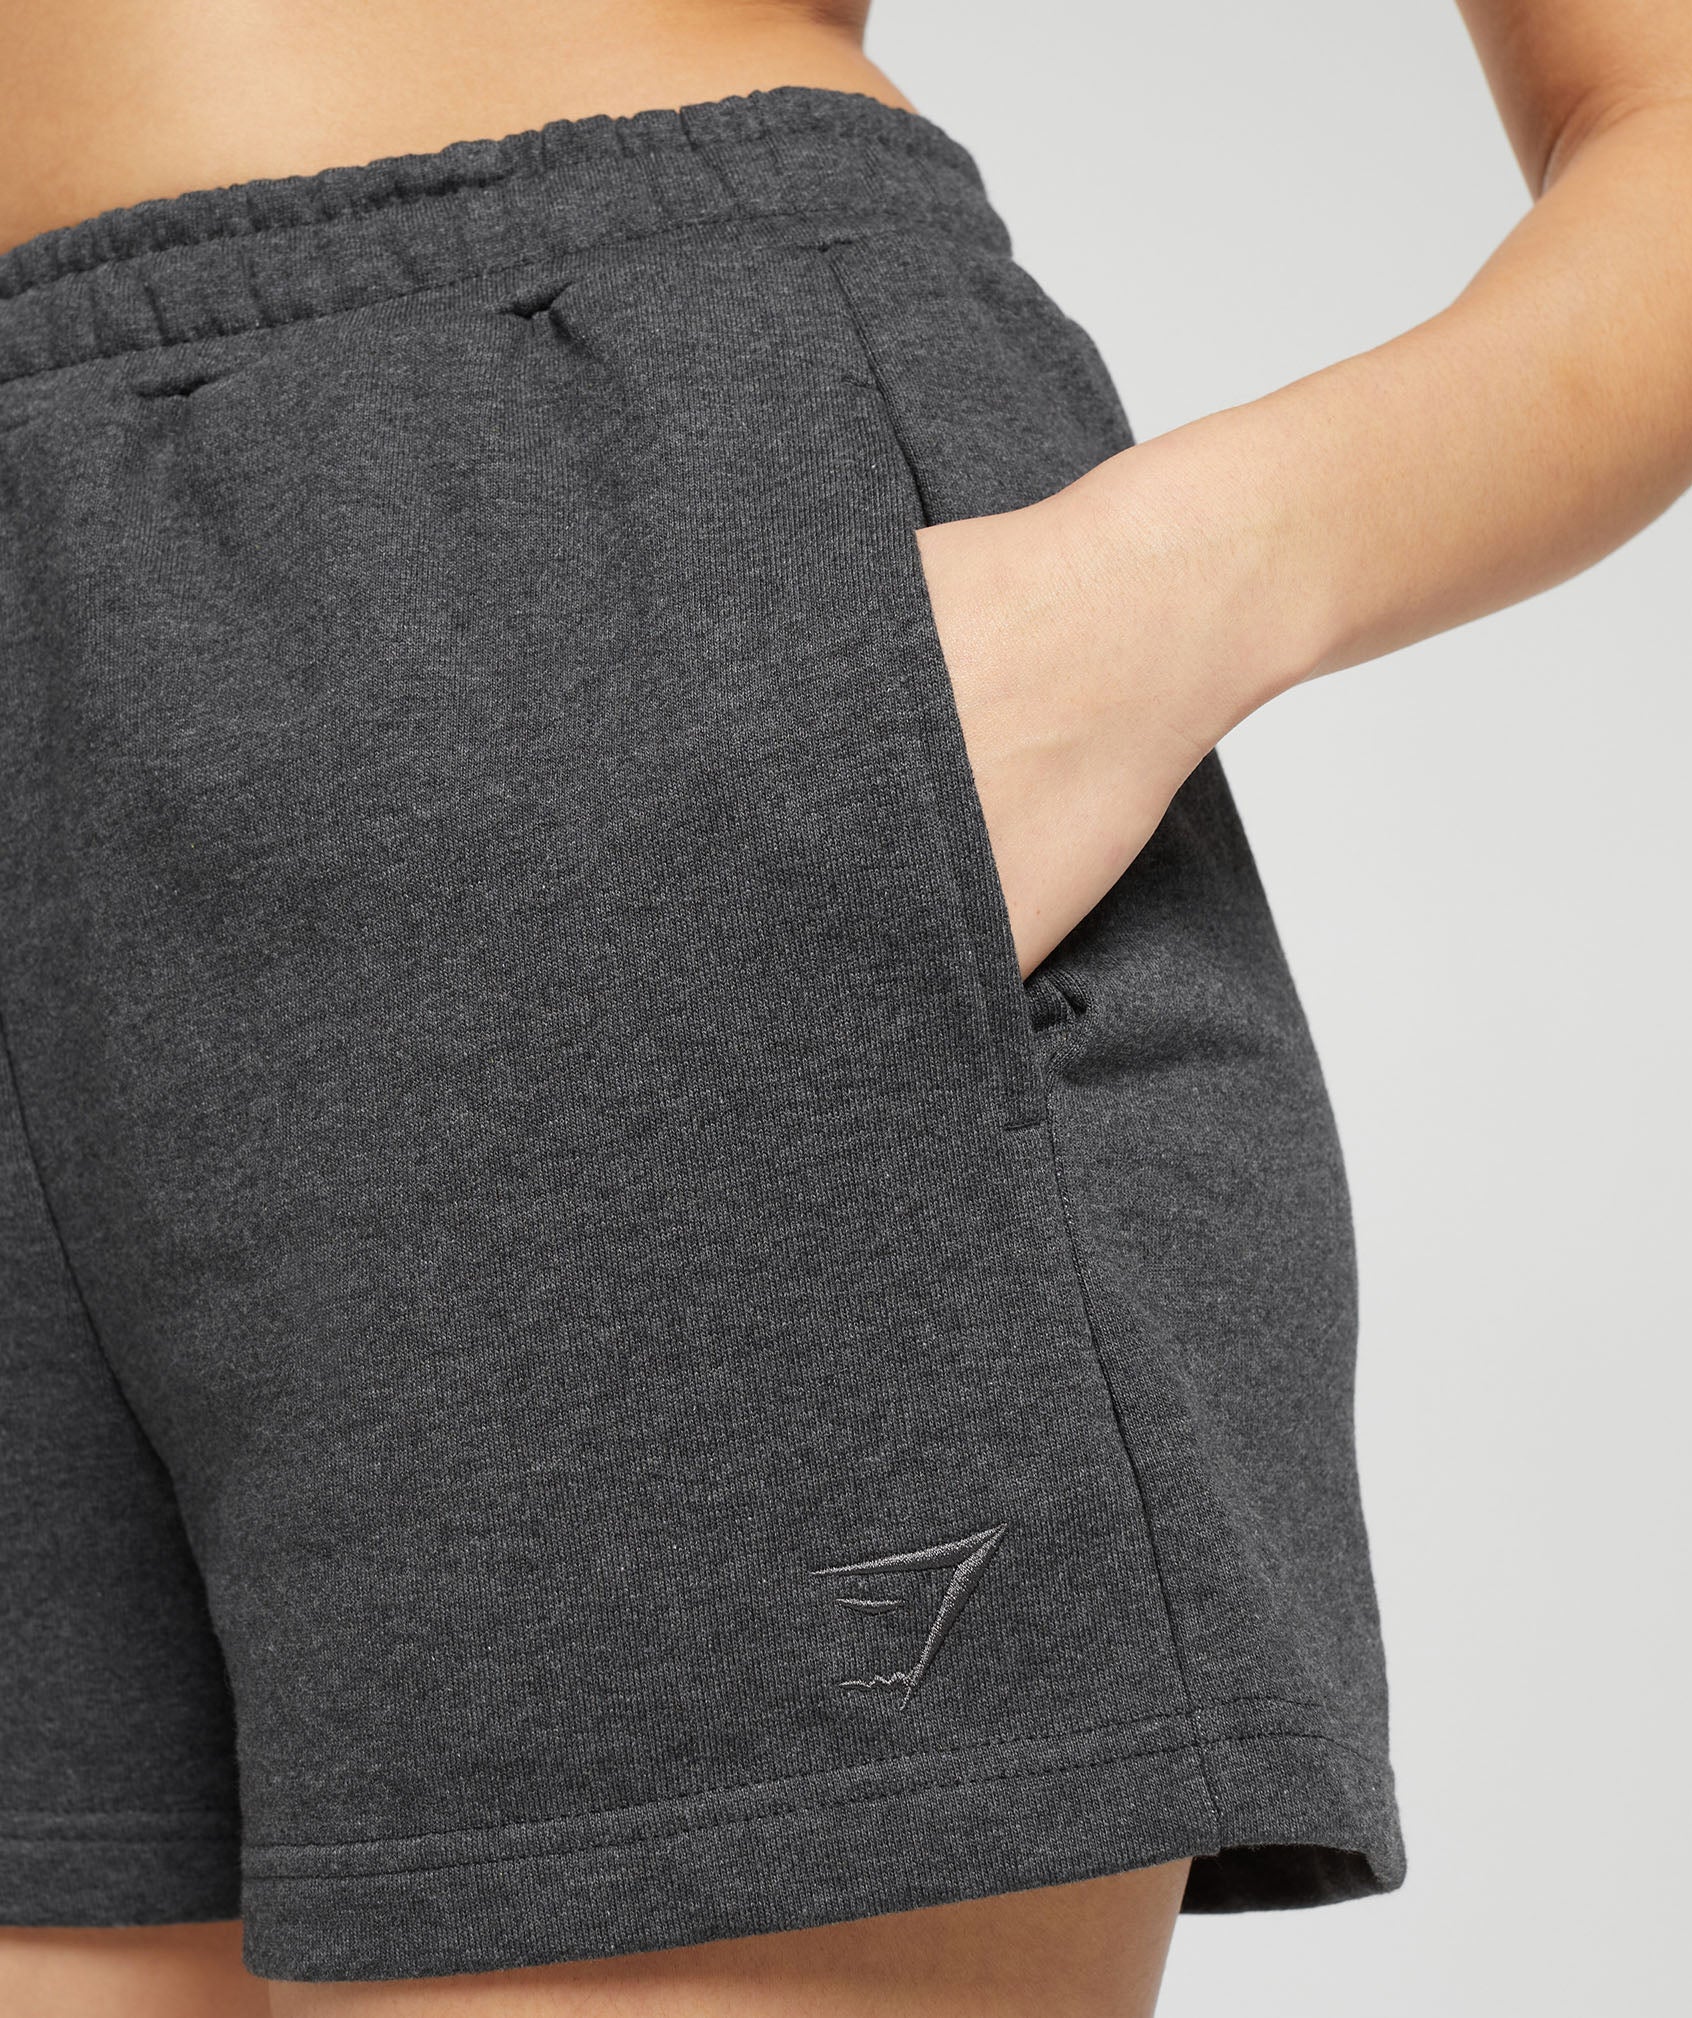 Rest Day Sweat Shorts in Black Core Marl - view 6